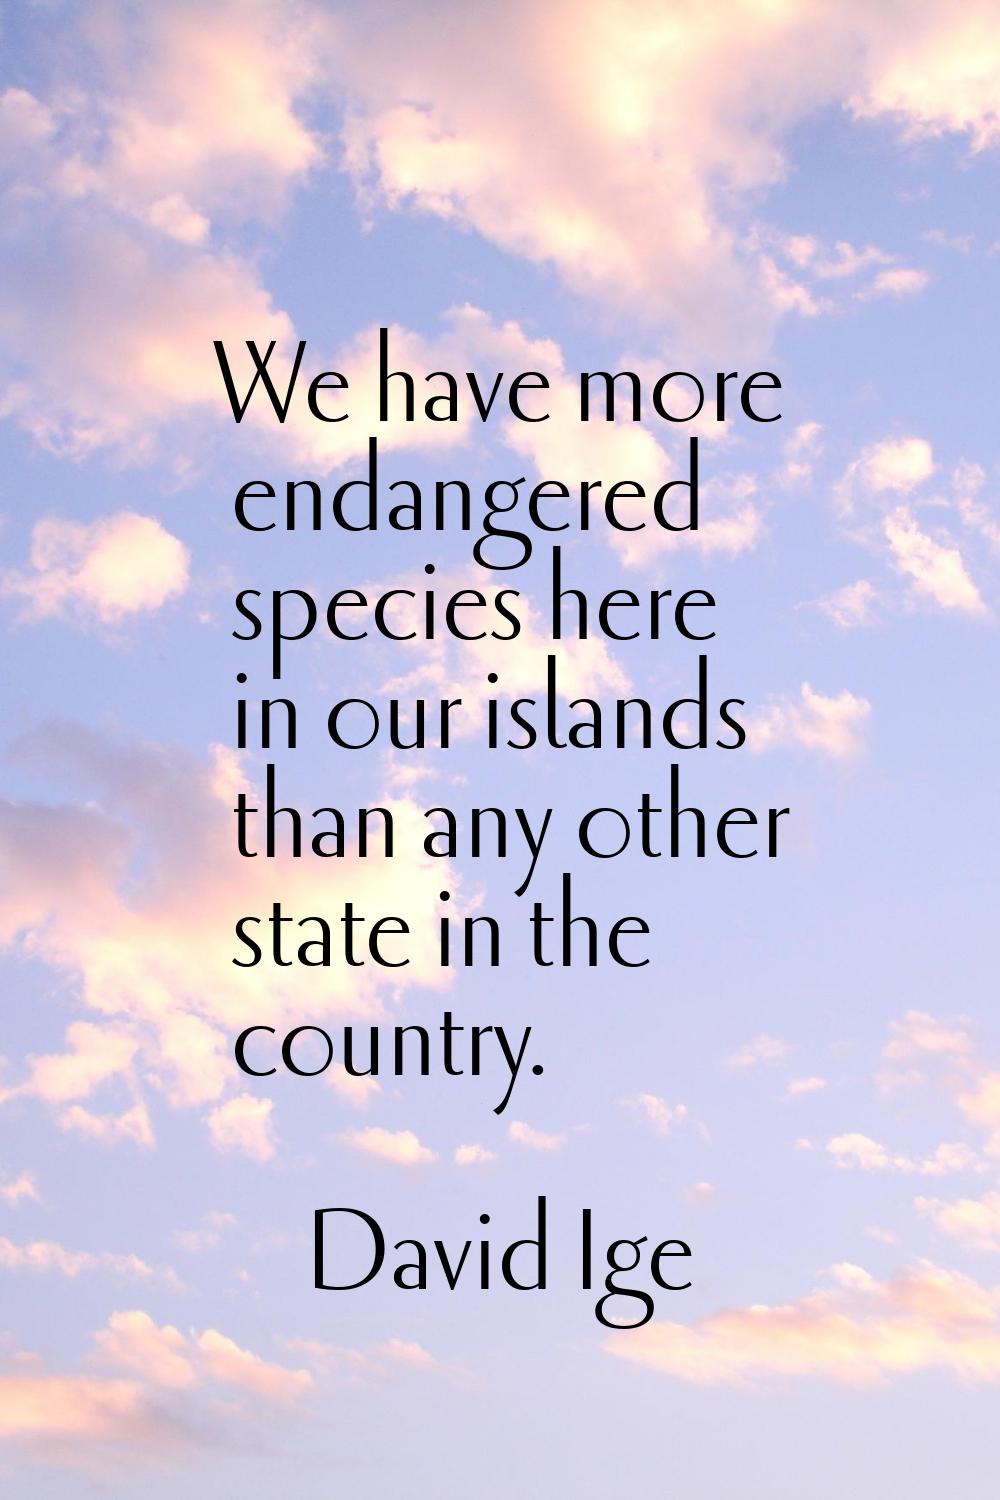 We have more endangered species here in our islands than any other state in the country.